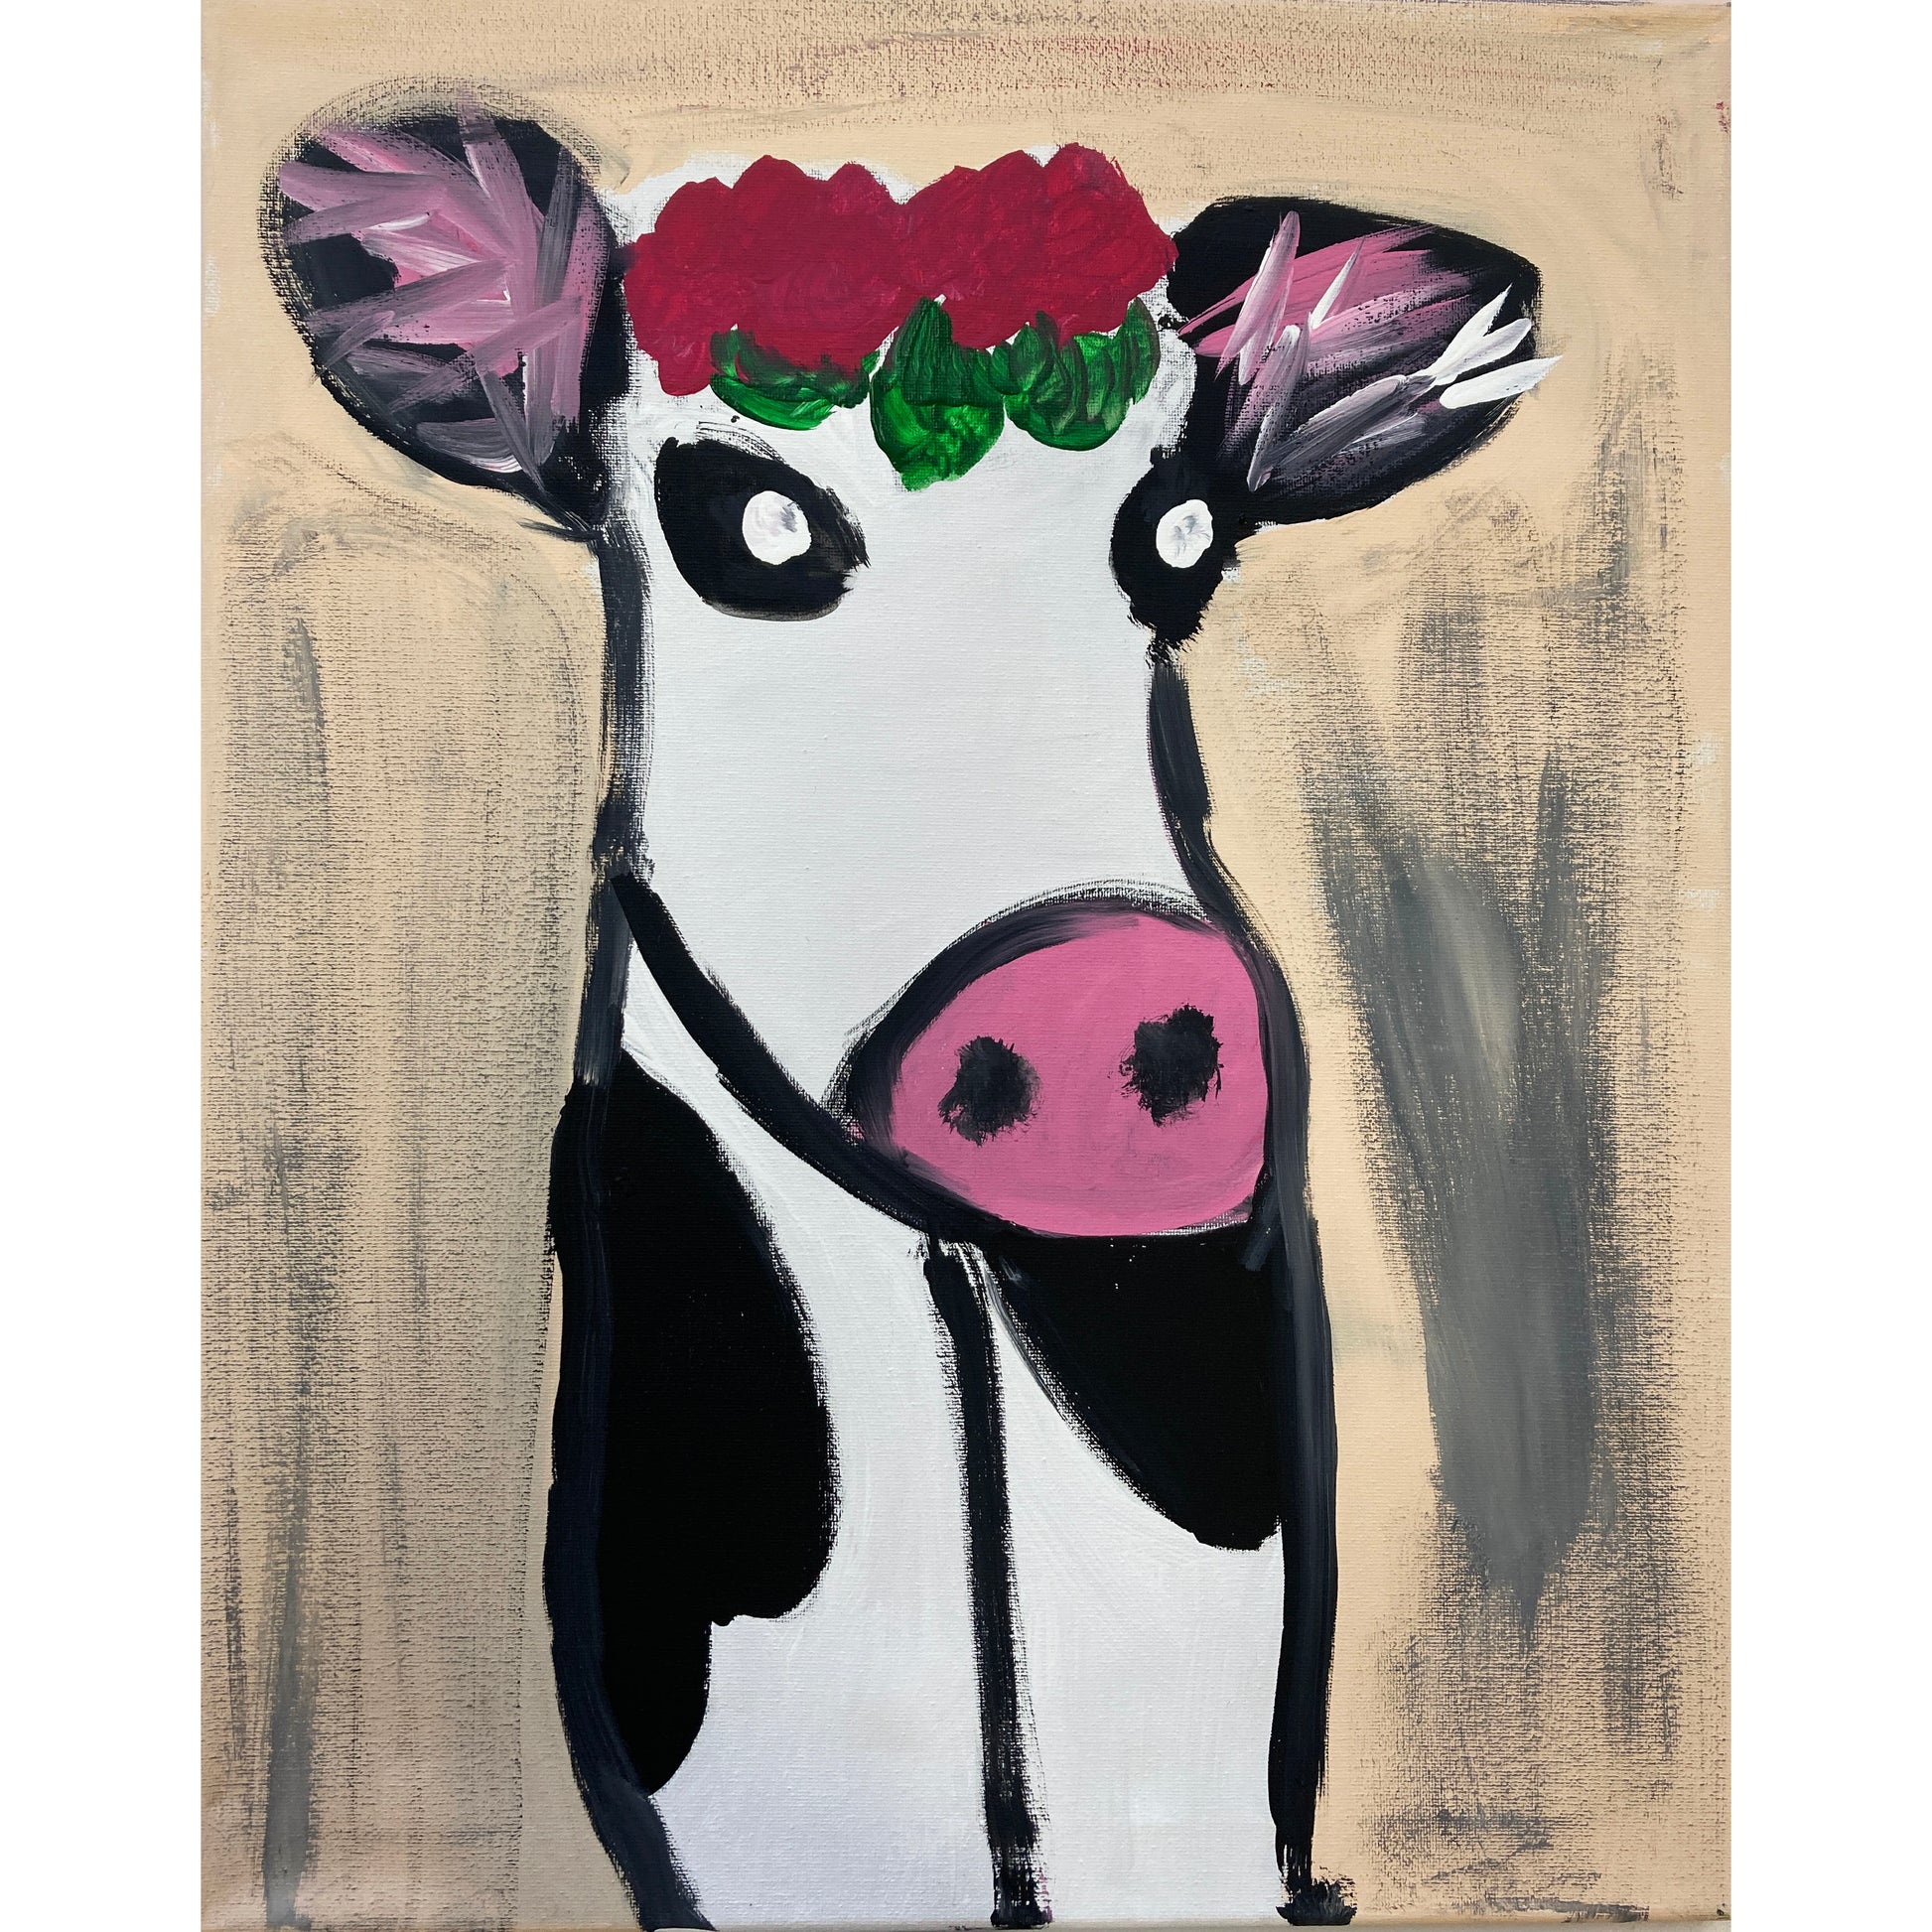 WATCH Resources Art Guild - Acrylic Paint on Stretched Canvas, 20 x 16 Original Fine Art, Cow made by Emily Knoles